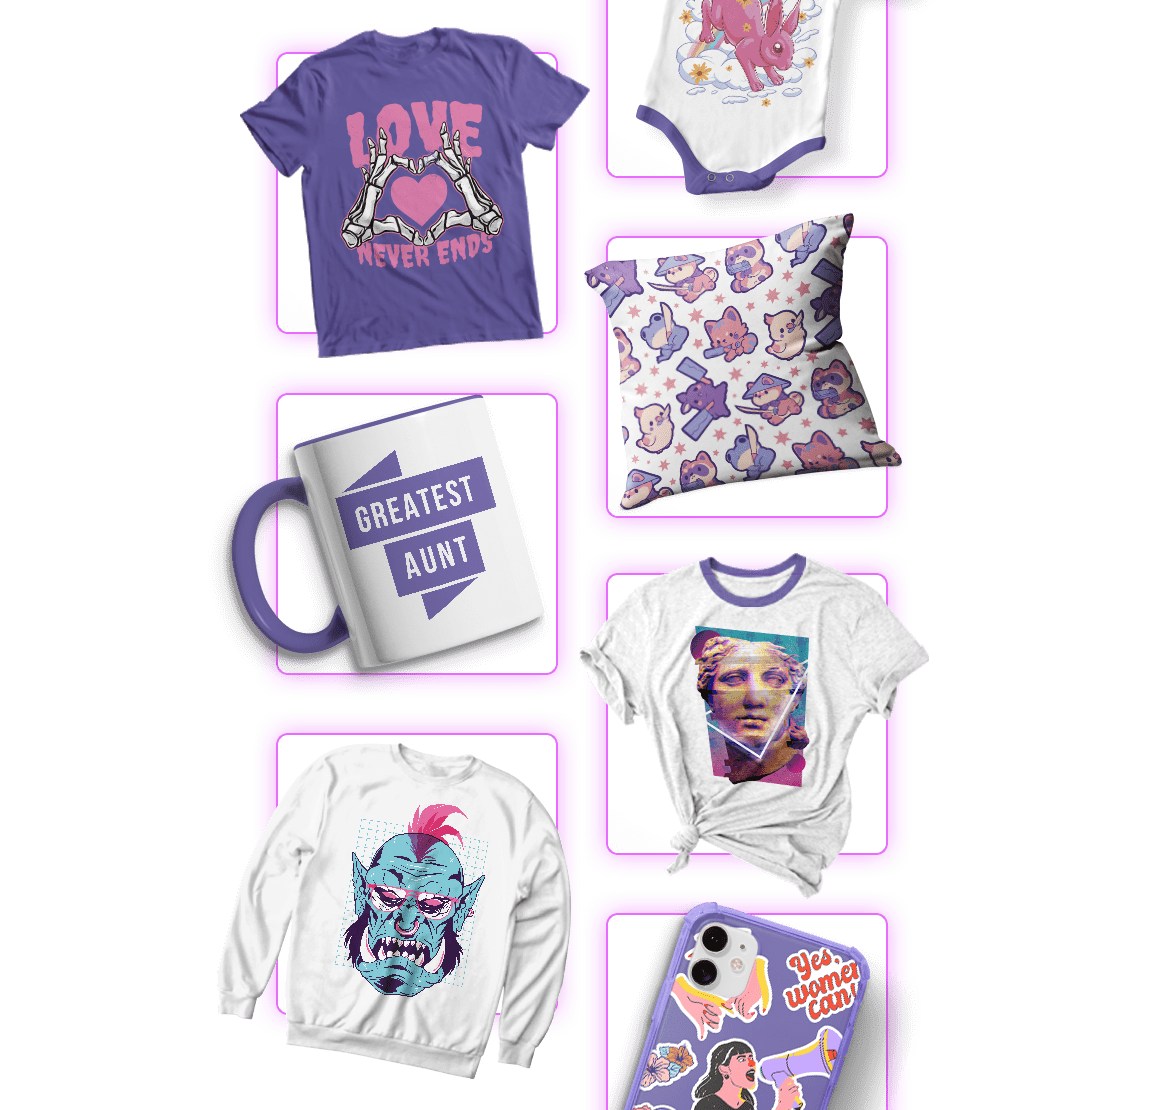 different merch products with designs